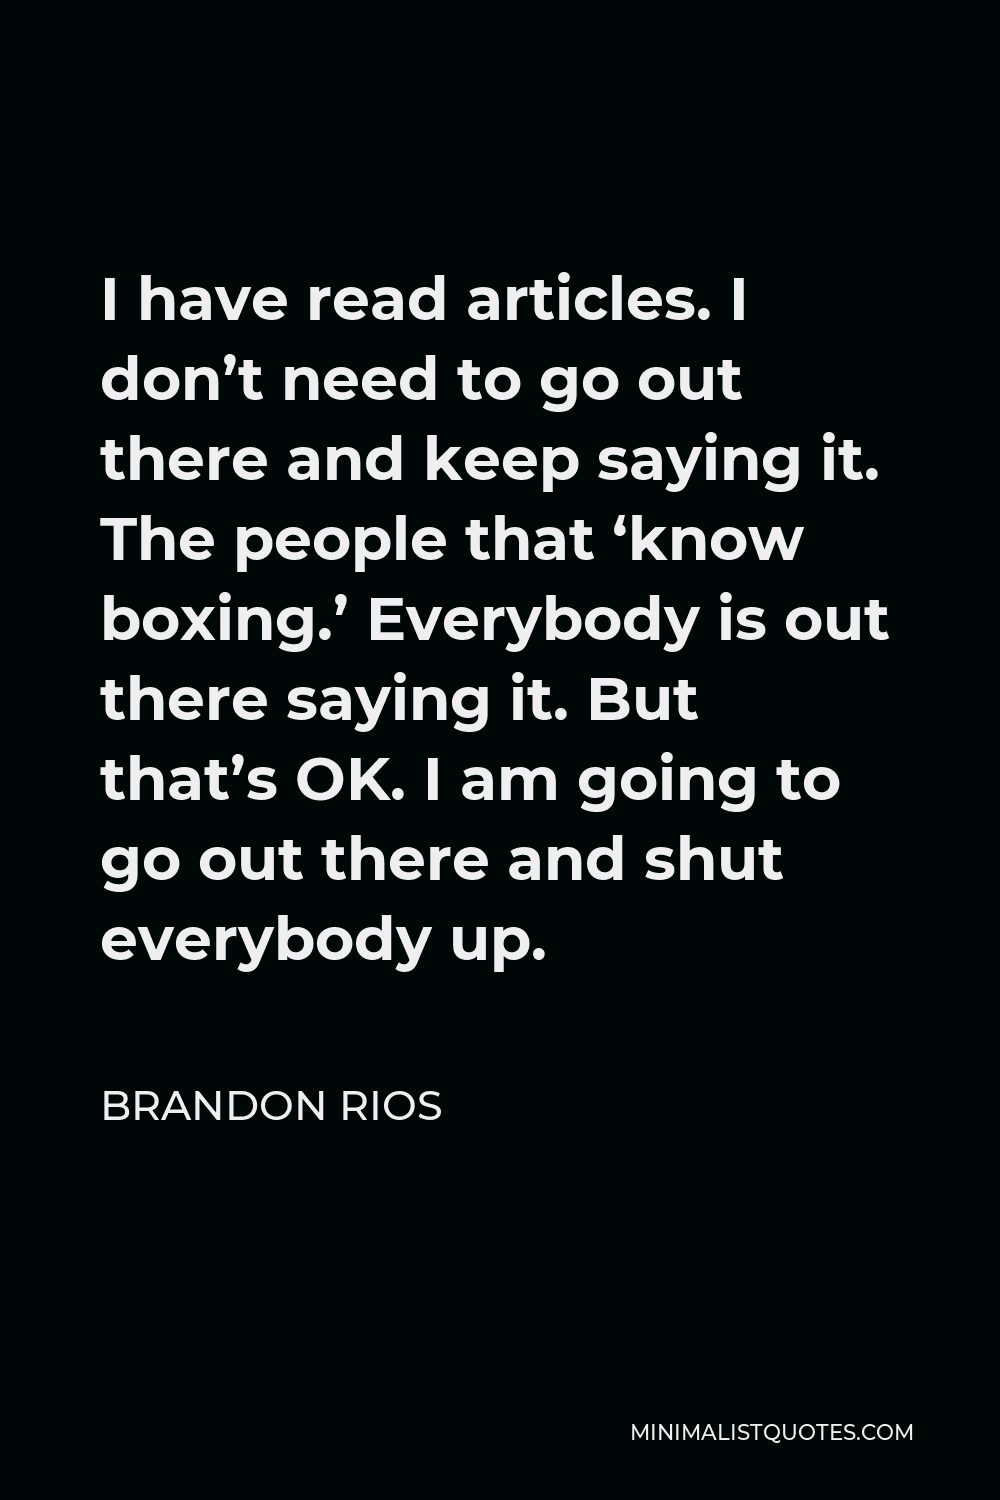 Brandon Rios Quote - I have read articles. I don’t need to go out there and keep saying it. The people that ‘know boxing.’ Everybody is out there saying it. But that’s OK. I am going to go out there and shut everybody up.